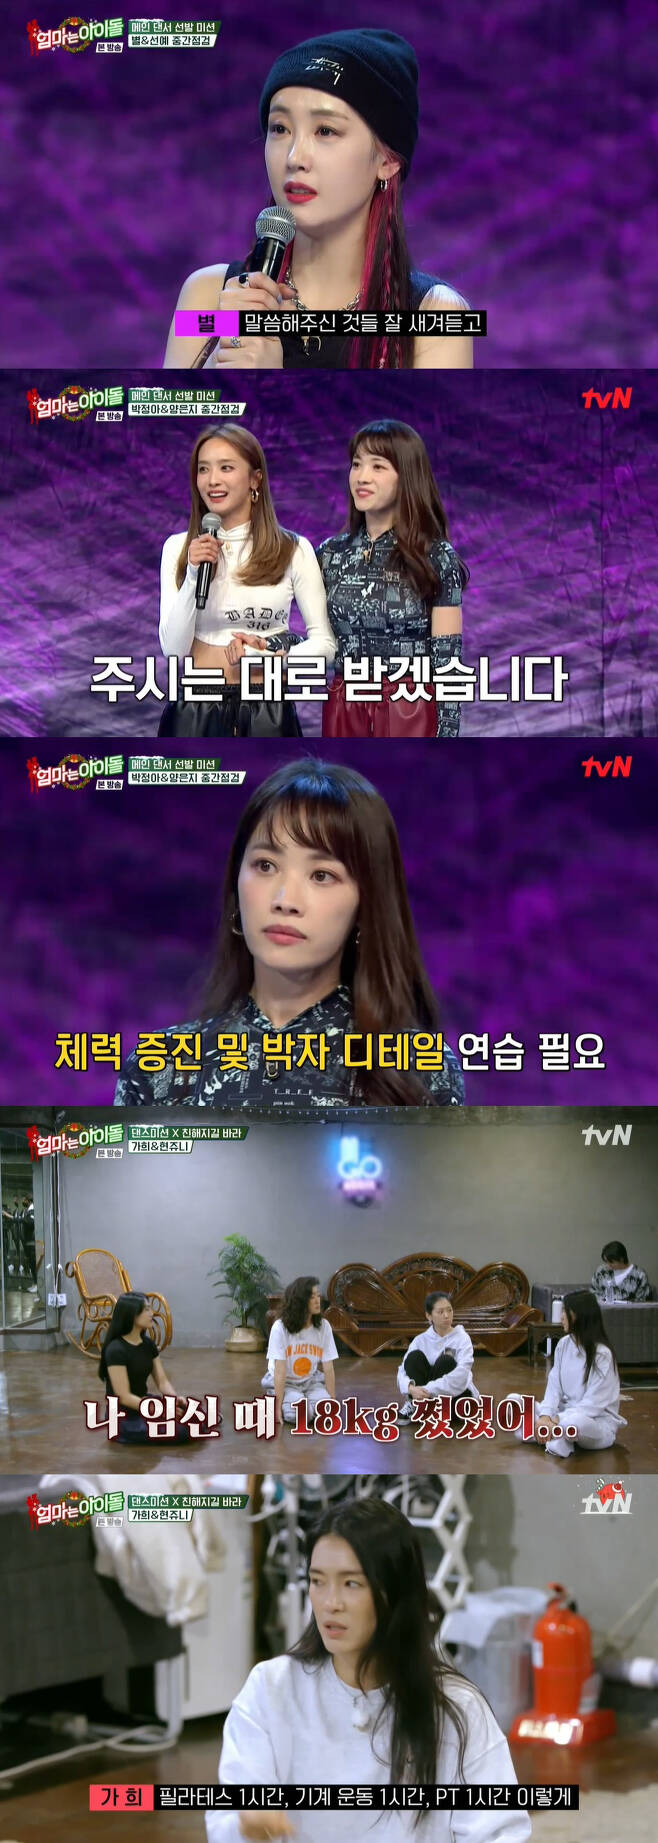 Mom is Idol group Wonder Girls former Sunye reveals his heart after leavingOn the 24th TVN entertainment program Mom Idol, a fierce mission was conducted to cover the main dancer.First, last week followed by the main Dancer selection mission, mid check time; Sunye and the Stars finished second with a total of 43 points.Park Jung-ah and Yang Eun Ji followed the stage.Yang Eun Ji was worried at the dictionary interview, saying, Gallish dance was a difficult dance line, so I wanted to be in trouble. Park Jung-ah also said, The movement itself was so fast that I thought, Whats going on?I was not able to use my body. Bae Yoon-jung said, Eunjis movements were slower than Jung-ah.It seems like there is a synergy that the team gives, Park Jung-ah said.When I was preparing for the first stage, I was under a lot of pressure to be Alone, but it was a great strength to be able to dance with someone.I was grateful that I could feel this feeling again in 12 years. They received 42 points.During choreography practice sessions between Kahi and The Current Queen is, Kahi was asked how to manage her body.Kahi is still in a slim figure after two children Child Birth.Kahi said: I think Im in a body. I hate heavy stuff. Im 18kg pregnant. I almost died when I pulled it out.I worked out three hours a day to find the strength of my abs. Pilates, machine workouts, and PTs for three months, and I didnt eat any carbs.Obstetrics and gynecology teachers said that the body of a woman is like a jar, and when she gives birth to a child, she breaks. In the meantime, the star said, Sunye did not come from Canada.As a Sister, I am sick and I am going to bring the side dish to the hostel. Haha laughed at the joke, saying, Thank you for giving Sunye a side dish, but do it to me, and My mothers side dish is the best.The star soon visited Sunyes quarters and said, I feel like Ive been playing at a friends house before. The two ate six side dishes and rice prepared by the star.Star asked Sunye, Do you want to see the kids? Sunye missed, saying, I wanted to see it, so I was watching the video before.Sunye said, I think it is the hardest thing to see the children. Sunye said, I started to understand that I work.I wanted to be scared (to do this program) and it was a big issue that I quit my current job when I was married. It could be sudden news from the public.I did not have a part to talk about my inner mind, so when I came back, I wanted to share this story naturally. Those who loved you would hate James, the star said, laughing. I know that the entertainment industry did not leave because I did not like it.I know the story until I decide, Sunye said. The members were surprised (at the news of the return) and said it was too good. On the day of the main Dancer selection mission, Sunye informed him he had suffered a Leg injury; having been injured while practicing the move to tear the Leg earlier in practice.He started to bruise and put on a pars, but it was hard to continue.Sunye said, I was fortunate that the hamstring ended with a computerized tomography angiography, not a torn hamstring, but I was worried that there was only a way to rest.Eventually, even during rehearsals, Sunye failed to properly digest the movement and appealed for Pained, I said I was going to kill her, embarrassingly eventually showing tears.The first Mission stage featured a star and a Sunye team; Sunye beat Pained and perfected the stage, and was saddened by the support as soon as the song was over.Sunye said, I thought there was no leg here and I played it as much as I could; I had no choice but to have fun. Bae Yoon-jung said, I did so well that I did not feel injured.I thought it would be burdensome for the star to be in the center, but I was surprised.The final stage was staged by Kahi and The Current Queen is; those who were in the middle rankings were overwhelmingly top of the showdown and the final rankings also topped the list.Next were the stars and Sunye, Park Jung-ah and Yang Eun Ji.Kahi and The Current Queen is, who became the main dancer, were thrilled and wept.Kahi said, As a main dancer, I will work hard with all my strength.